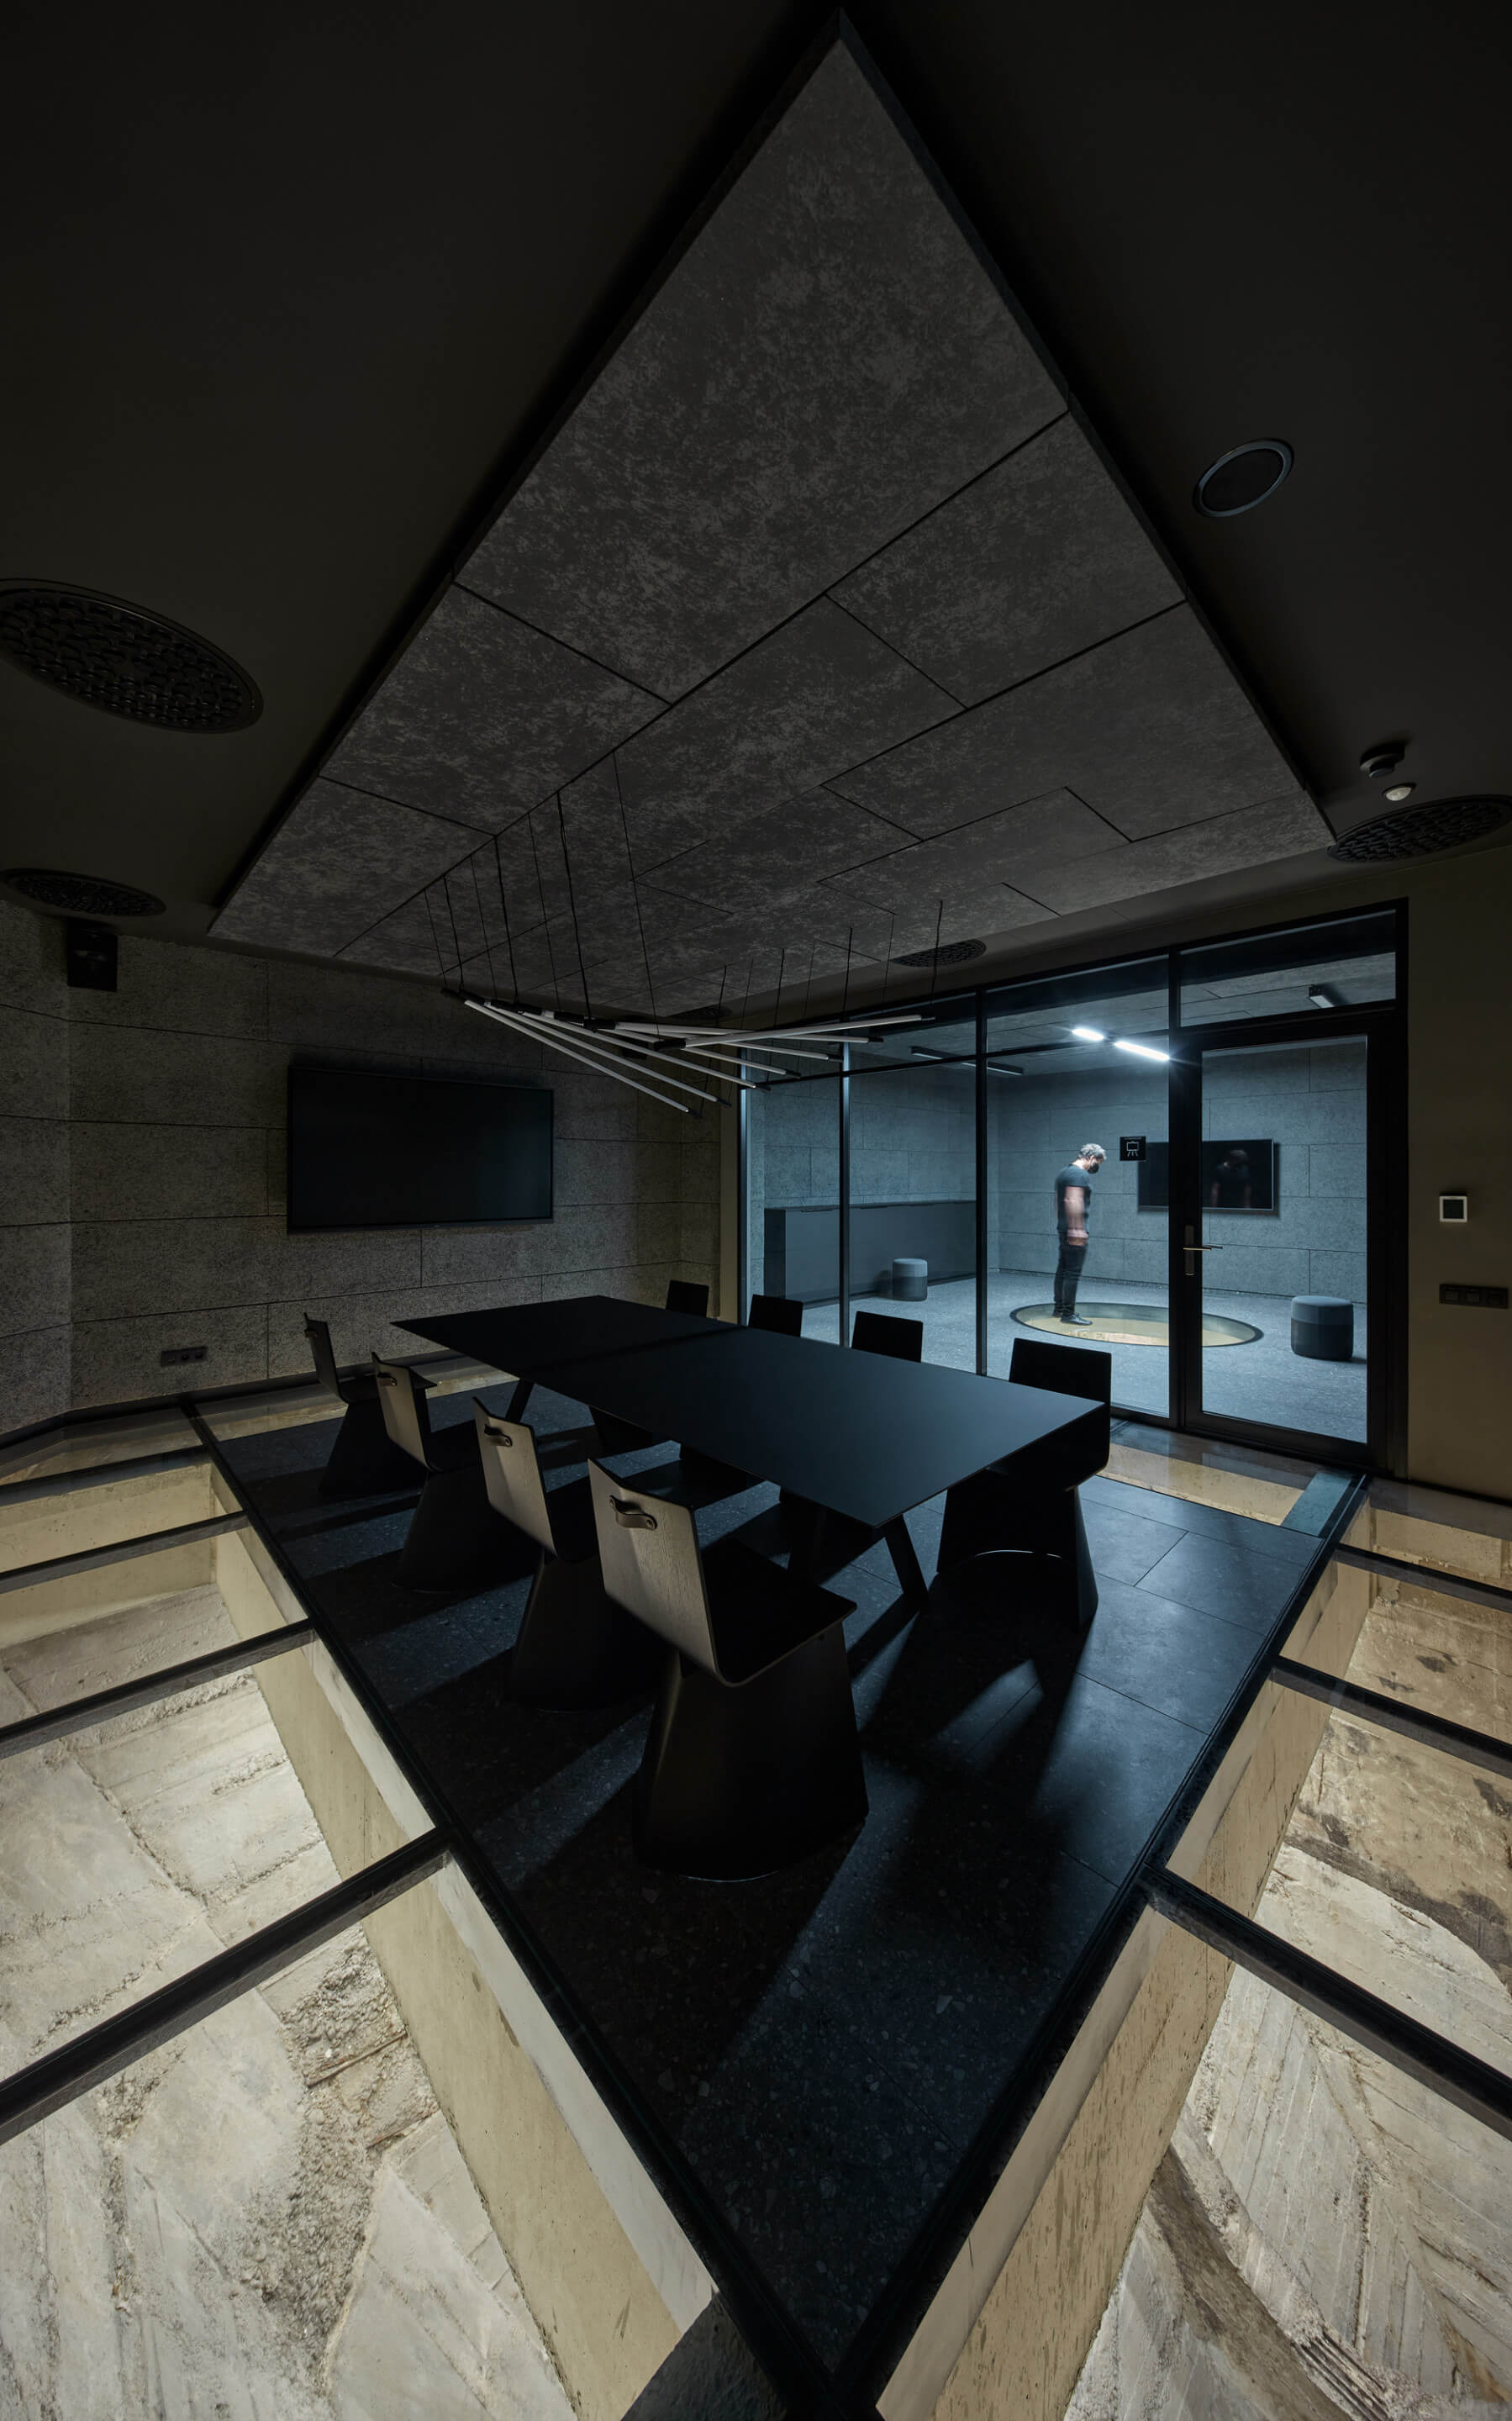 A meeting room inside of a concrete hopper with glass floors